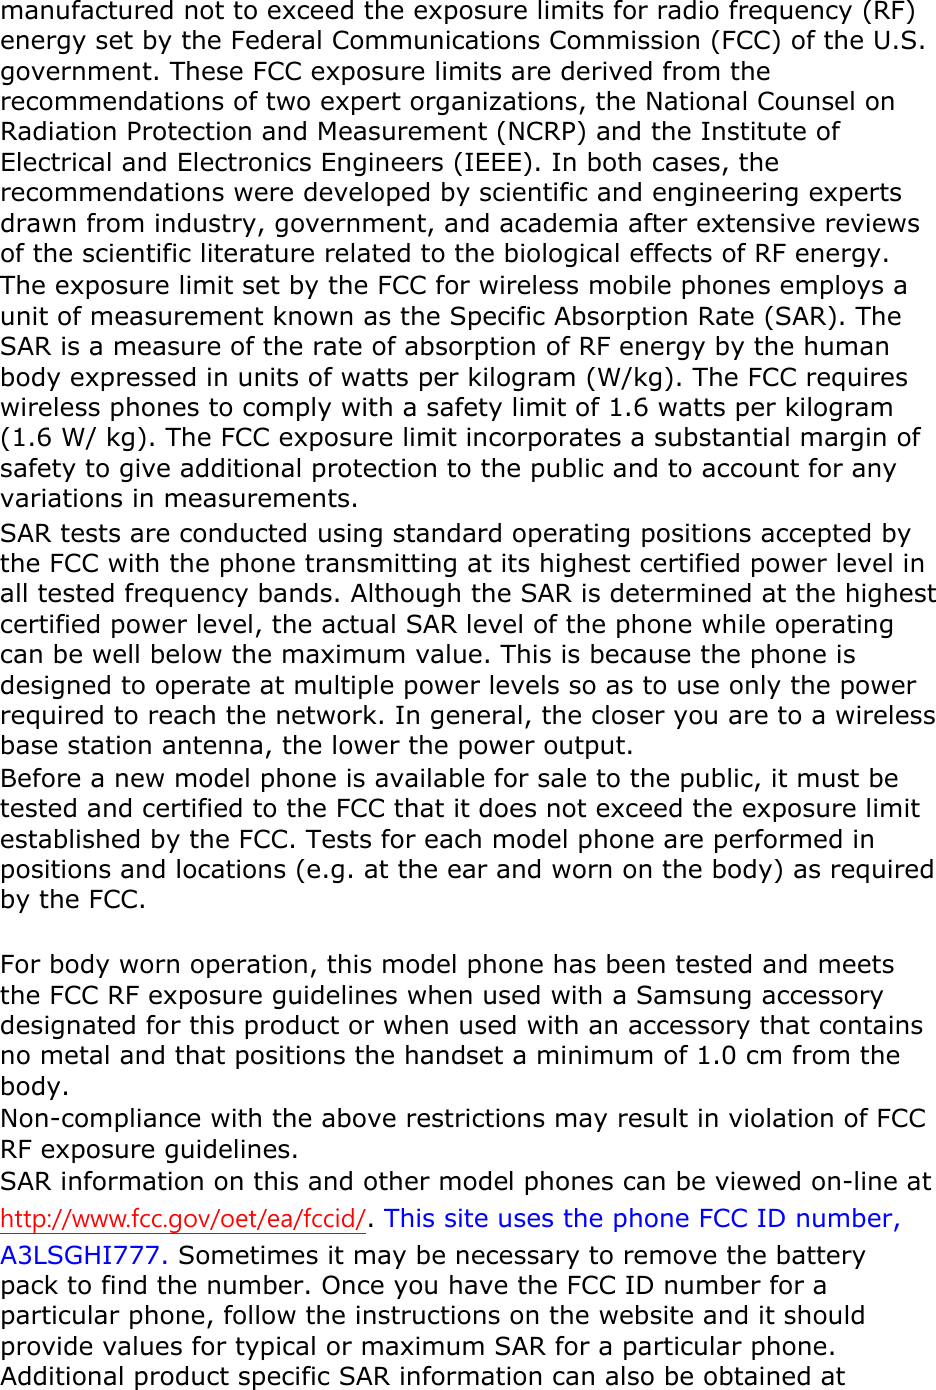 manufactured not to exceed the exposure limits for radio frequency (RF) energy set by the Federal Communications Commission (FCC) of the U.S. government. These FCC exposure limits are derived from the recommendations of two expert organizations, the National Counsel on Radiation Protection and Measurement (NCRP) and the Institute of Electrical and Electronics Engineers (IEEE). In both cases, the recommendations were developed by scientific and engineering experts drawn from industry, government, and academia after extensive reviews of the scientific literature related to the biological effects of RF energy. The exposure limit set by the FCC for wireless mobile phones employs a unit of measurement known as the Specific Absorption Rate (SAR). The SAR is a measure of the rate of absorption of RF energy by the human body expressed in units of watts per kilogram (W/kg). The FCC requires wireless phones to comply with a safety limit of 1.6 watts per kilogram (1.6 W/ kg). The FCC exposure limit incorporates a substantial margin of safety to give additional protection to the public and to account for any variations in measurements. SAR tests are conducted using standard operating positions accepted by the FCC with the phone transmitting at its highest certified power level in all tested frequency bands. Although the SAR is determined at the highest certified power level, the actual SAR level of the phone while operating can be well below the maximum value. This is because the phone is designed to operate at multiple power levels so as to use only the power required to reach the network. In general, the closer you are to a wireless base station antenna, the lower the power output. Before a new model phone is available for sale to the public, it must be tested and certified to the FCC that it does not exceed the exposure limit established by the FCC. Tests for each model phone are performed in positions and locations (e.g. at the ear and worn on the body) as required by the FCC.      For body worn operation, this model phone has been tested and meets the FCC RF exposure guidelines when used with a Samsung accessory designated for this product or when used with an accessory that contains no metal and that positions the handset a minimum of 1.0 cm from the body.  Non-compliance with the above restrictions may result in violation of FCC RF exposure guidelines. SAR information on this and other model phones can be viewed on-line at http://www.fcc.gov/oet/ea/fccid/. This site uses the phone FCC ID number, A3LSGHI777. Sometimes it may be necessary to remove the battery pack to find the number. Once you have the FCC ID number for a particular phone, follow the instructions on the website and it should provide values for typical or maximum SAR for a particular phone. Additional product specific SAR information can also be obtained at 